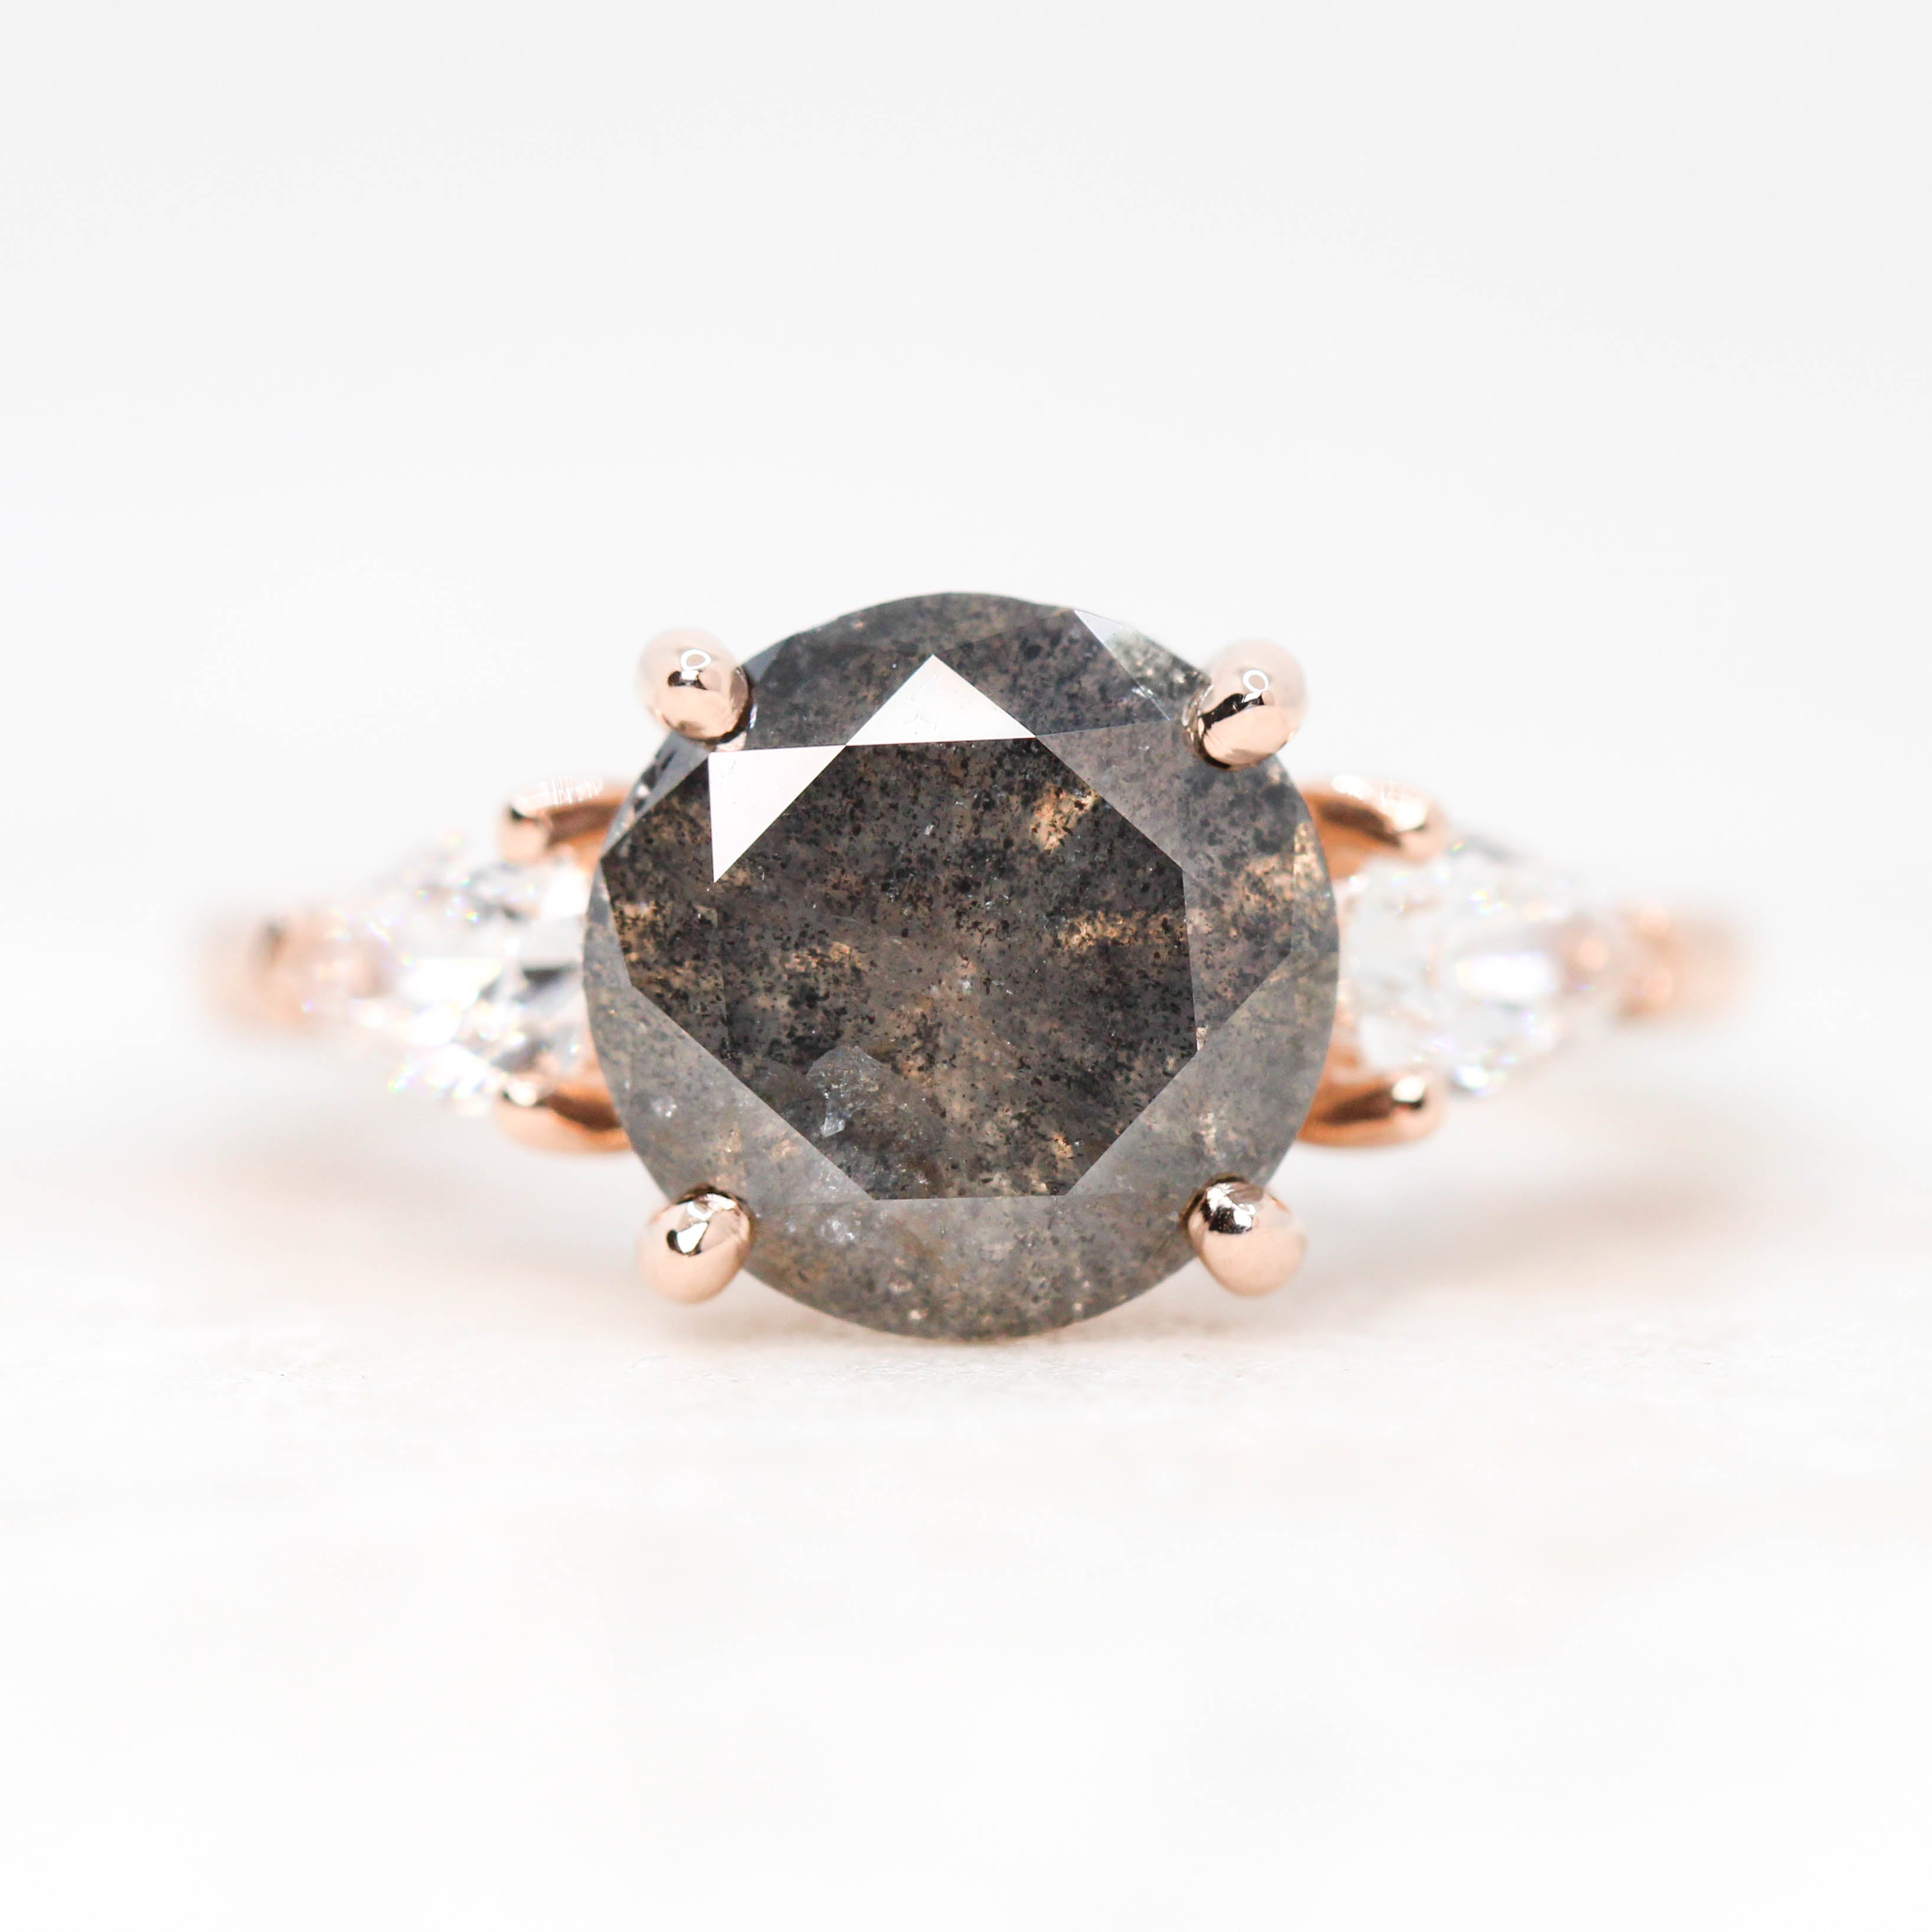 Faye Ring with a 3.46 Carat Celestial Gray Round Diamond and Clear White Accent Diamonds in 14k Rose Gold - Ready to Size and Ship - Midwinter Co. Alternative Bridal Rings and Modern Fine Jewelry